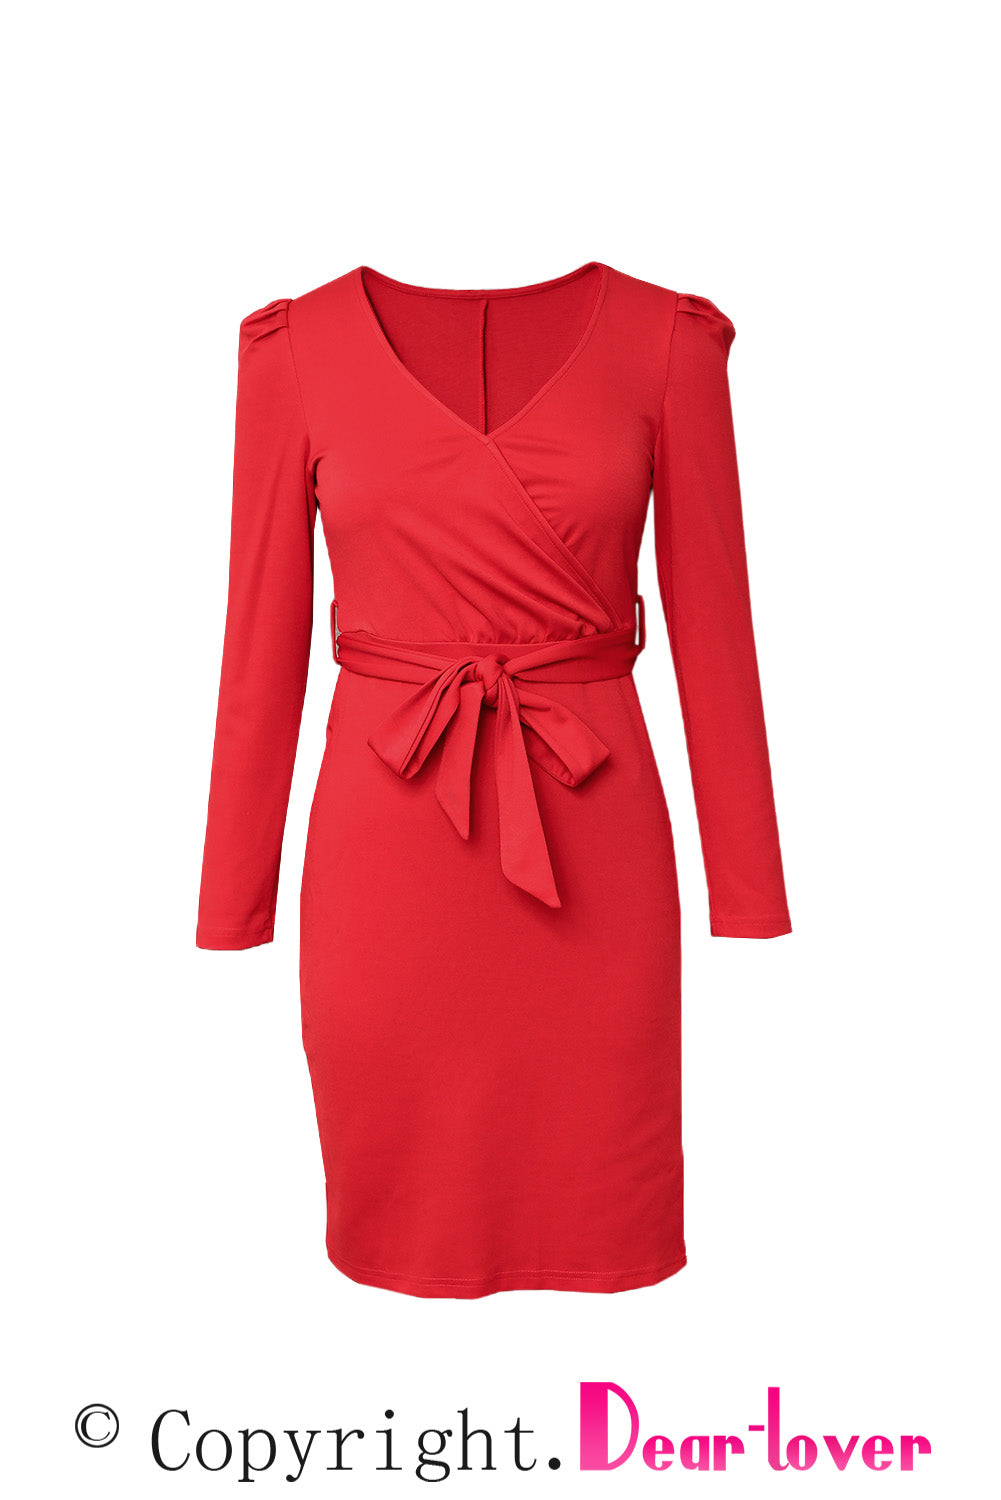 Red Ladies V Neck Long Sleeve Dress Side Split Bodycon Dress with Belt LC229110-3